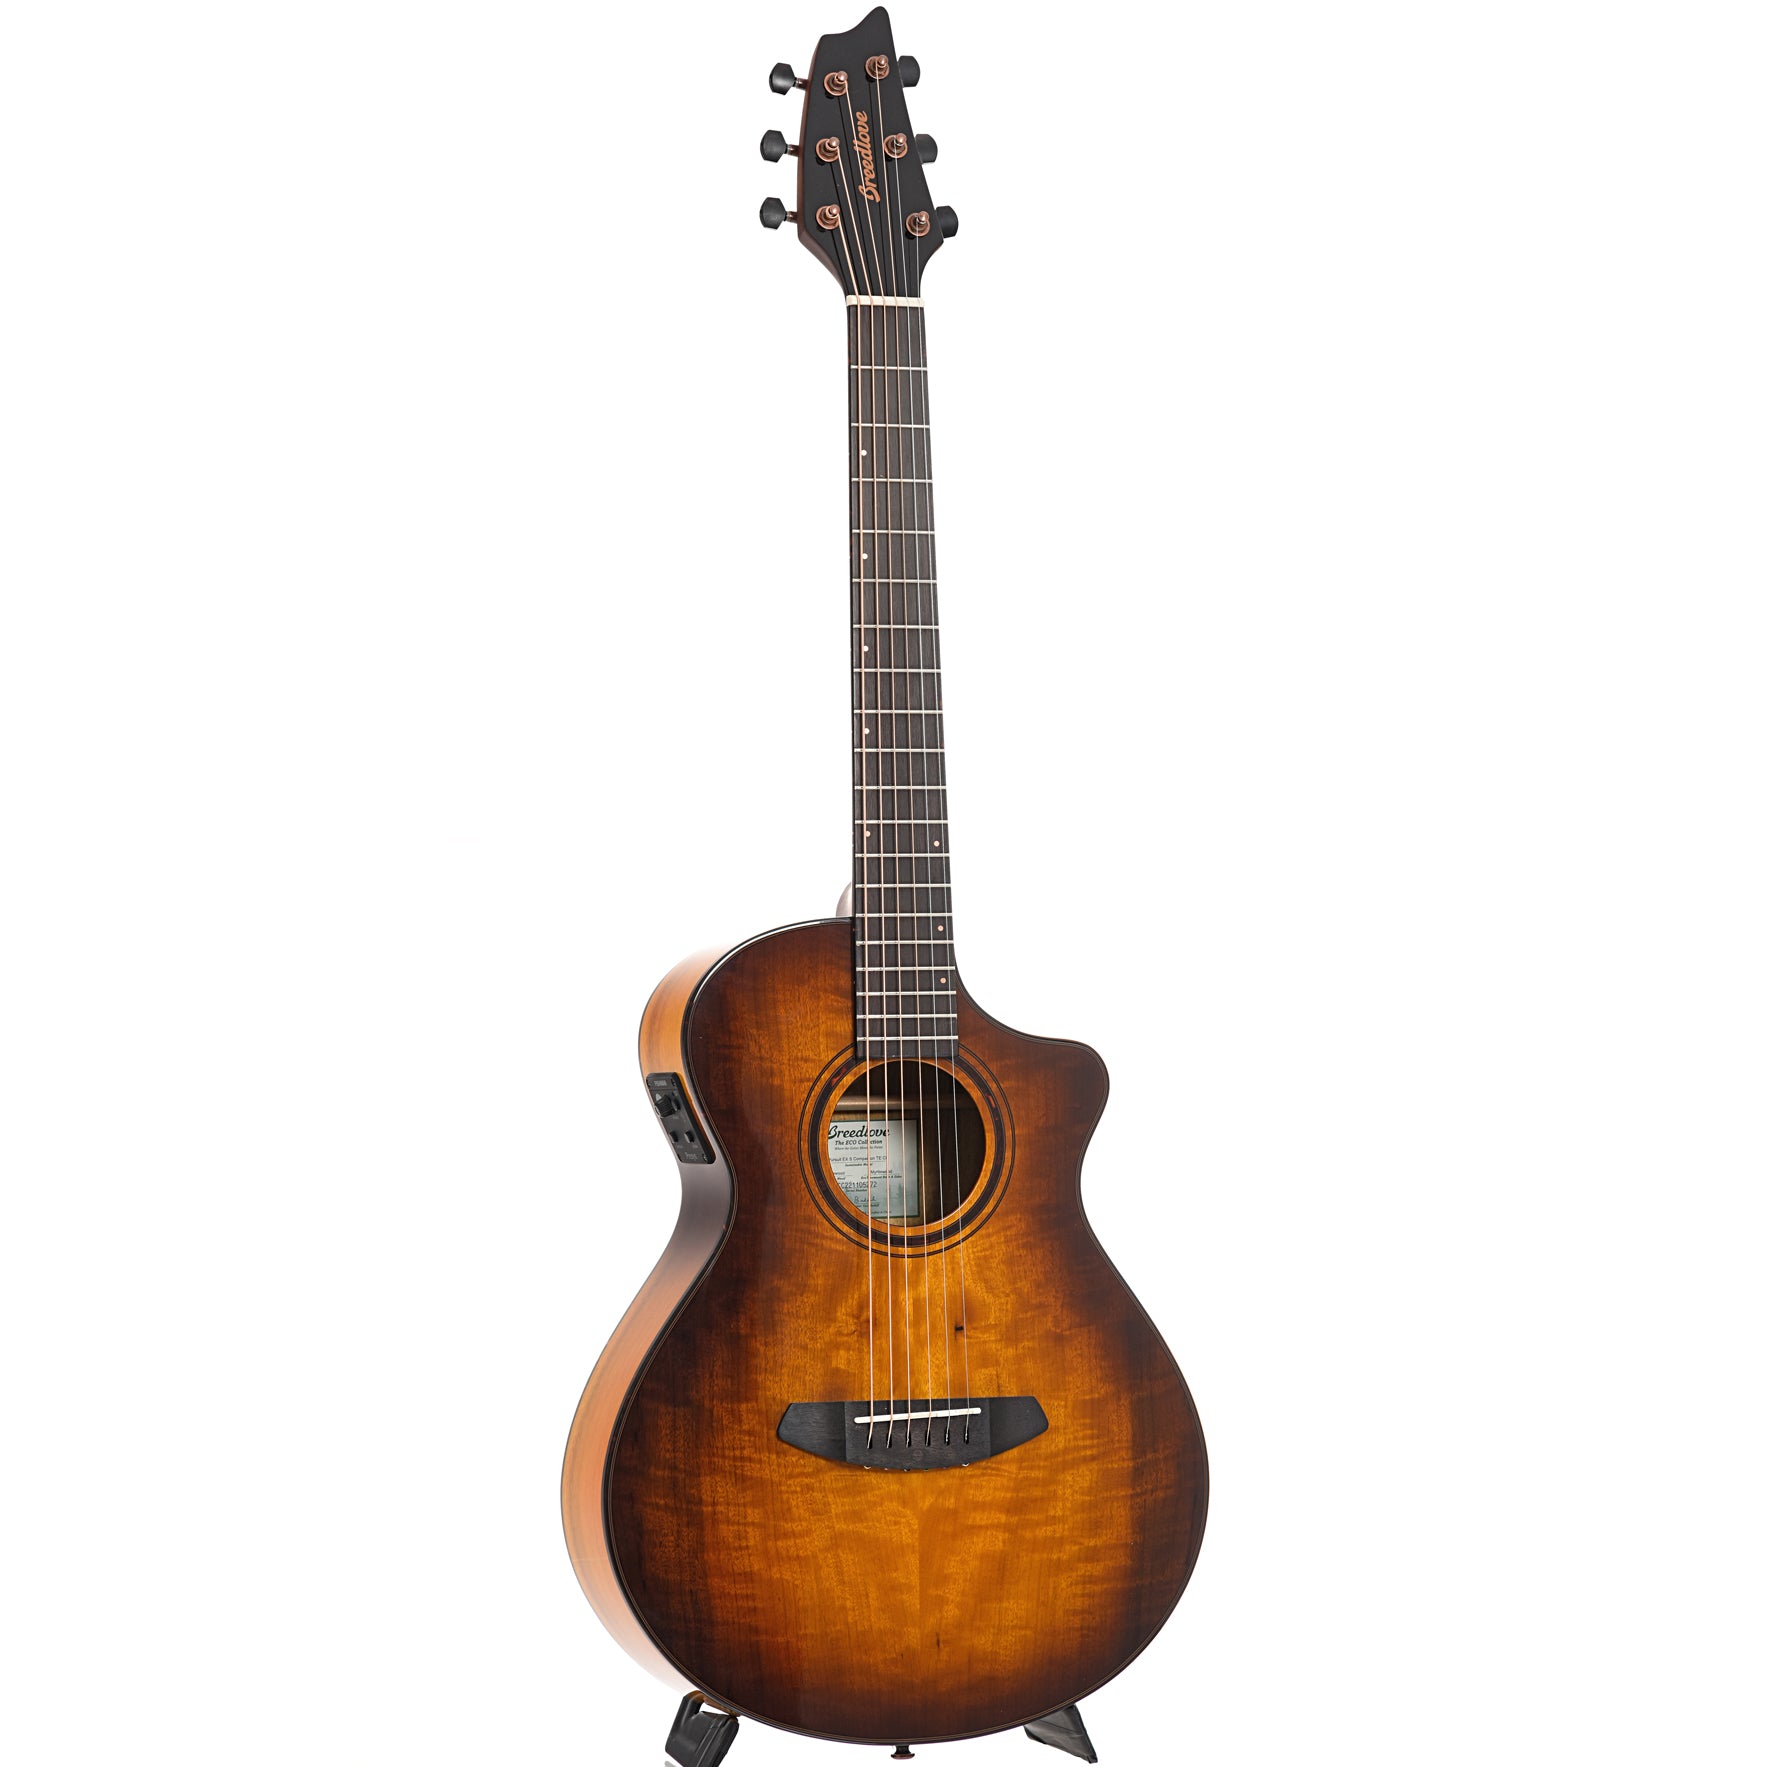 Full front and side of Breedlove Pursuit Exotic S Companion Tiger's Eye CE Myrtlewood-Myrtlewood